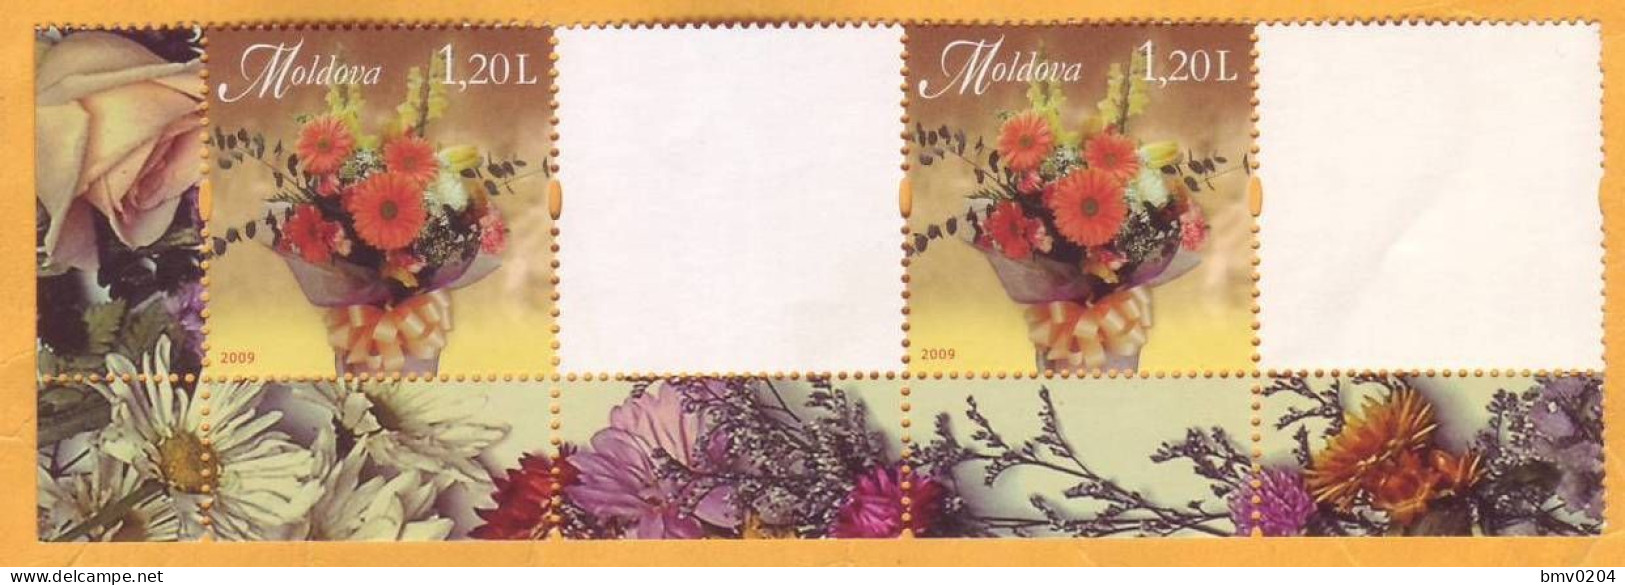 2009 2013 Moldova Personalized Postage Stamps, Issue 1.  SAMPLES. Wildflowers  2v  Mint - Moldova